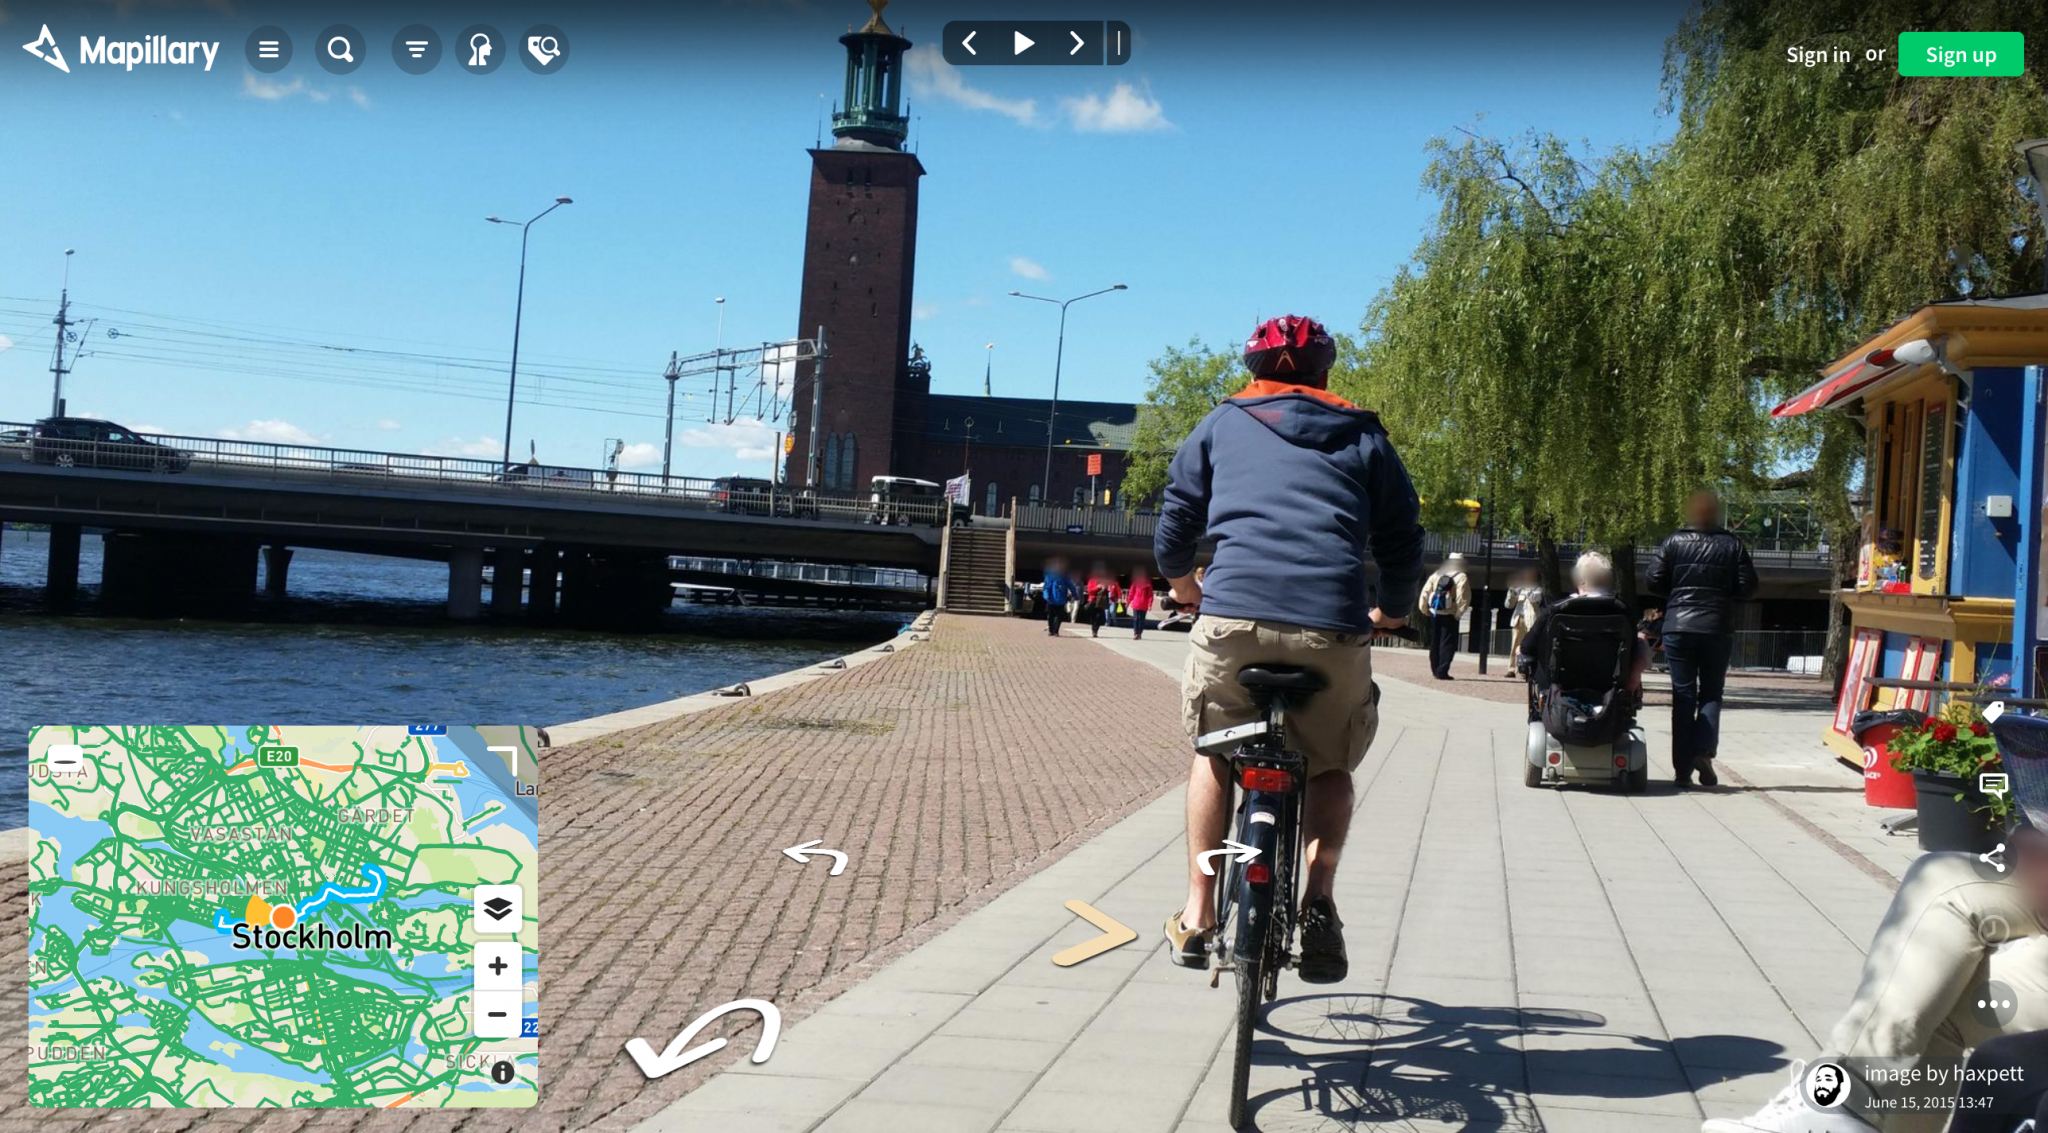 Image from one of the cycle paths in Stockholm, by a Mapillary user.